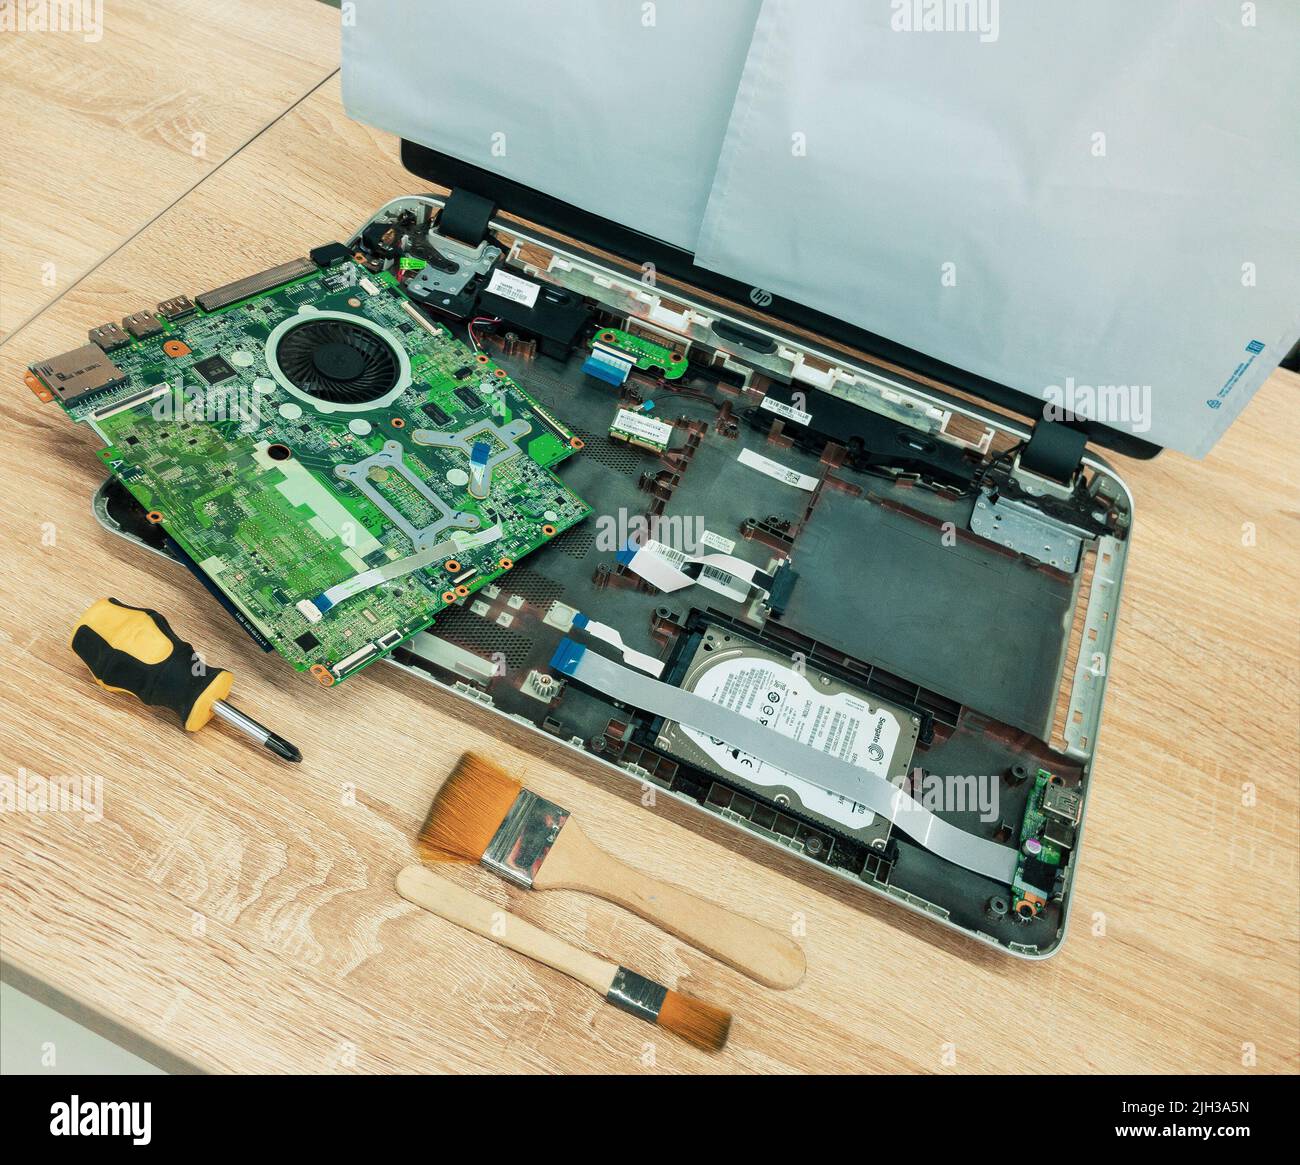 2022: notebook laptop Hewlett Packard HP Pavilion 17 disassembled for cleaning Stock Photo